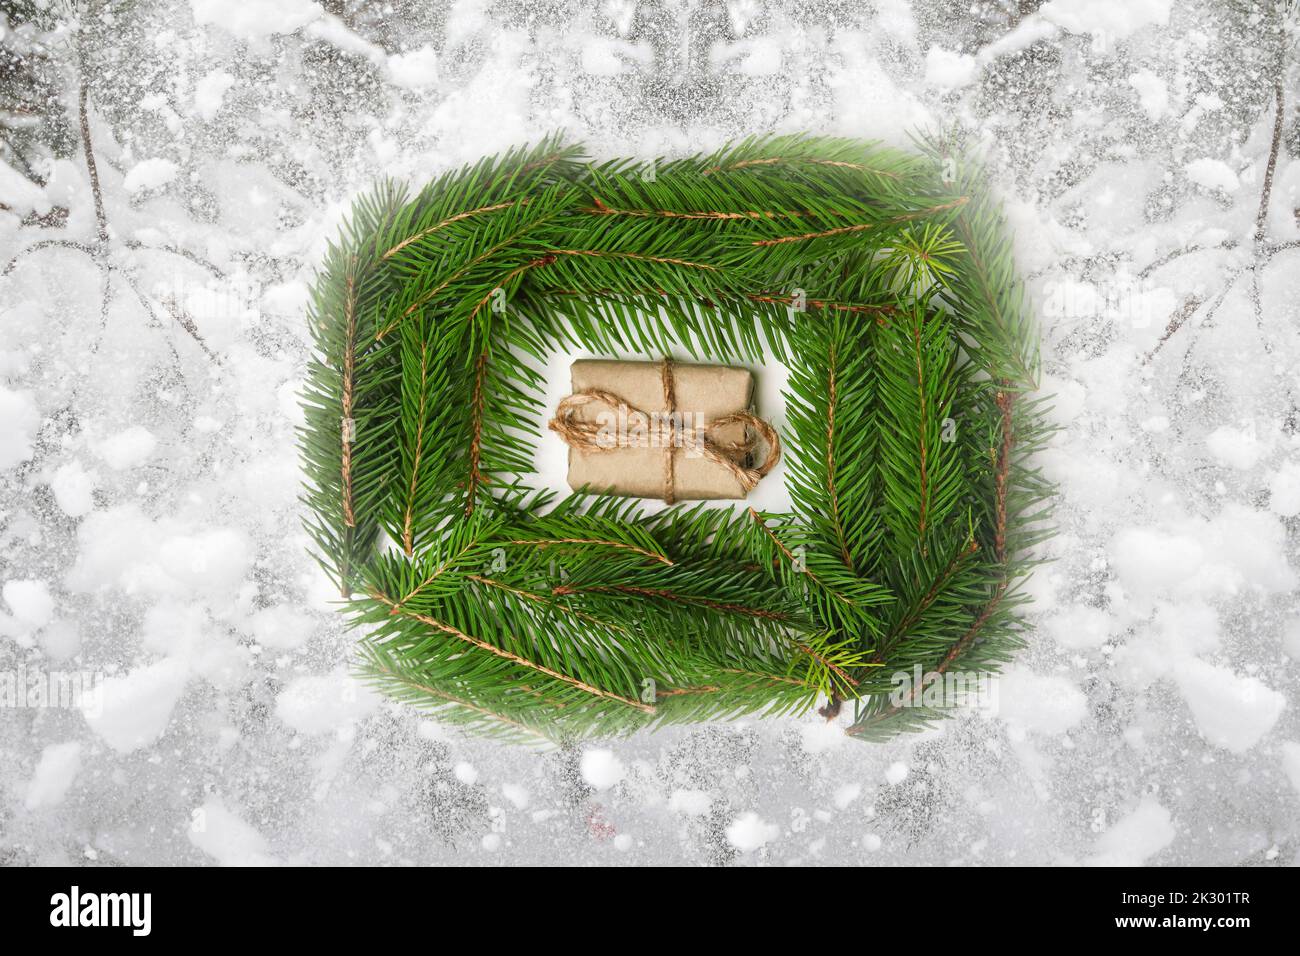 Defocus Christmas gift on green fir natural background and white snowy background. Eco craft gift boxes. Organic eco craft Christmas tree. Creative ar Stock Photo